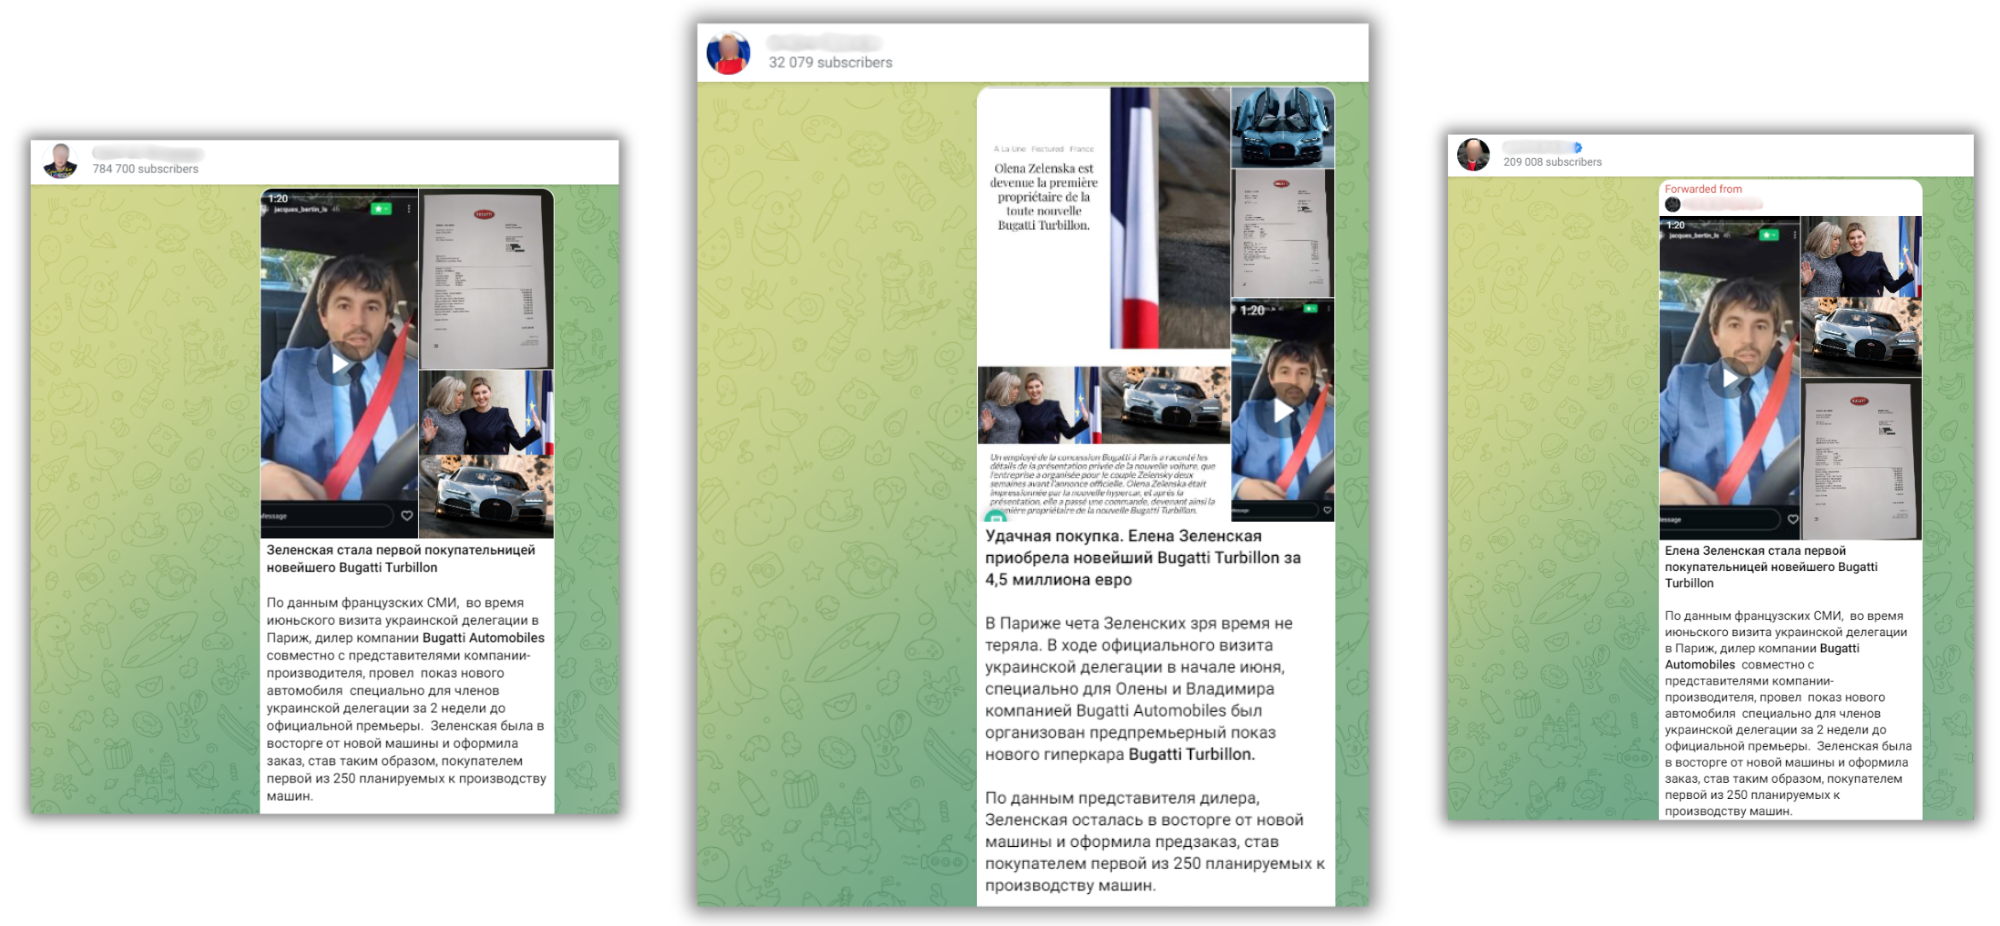 Dozens of Russian-language Telegram channels, identified by RFI as vectors of Russian propaganda, shared this fake news with their subscribers.